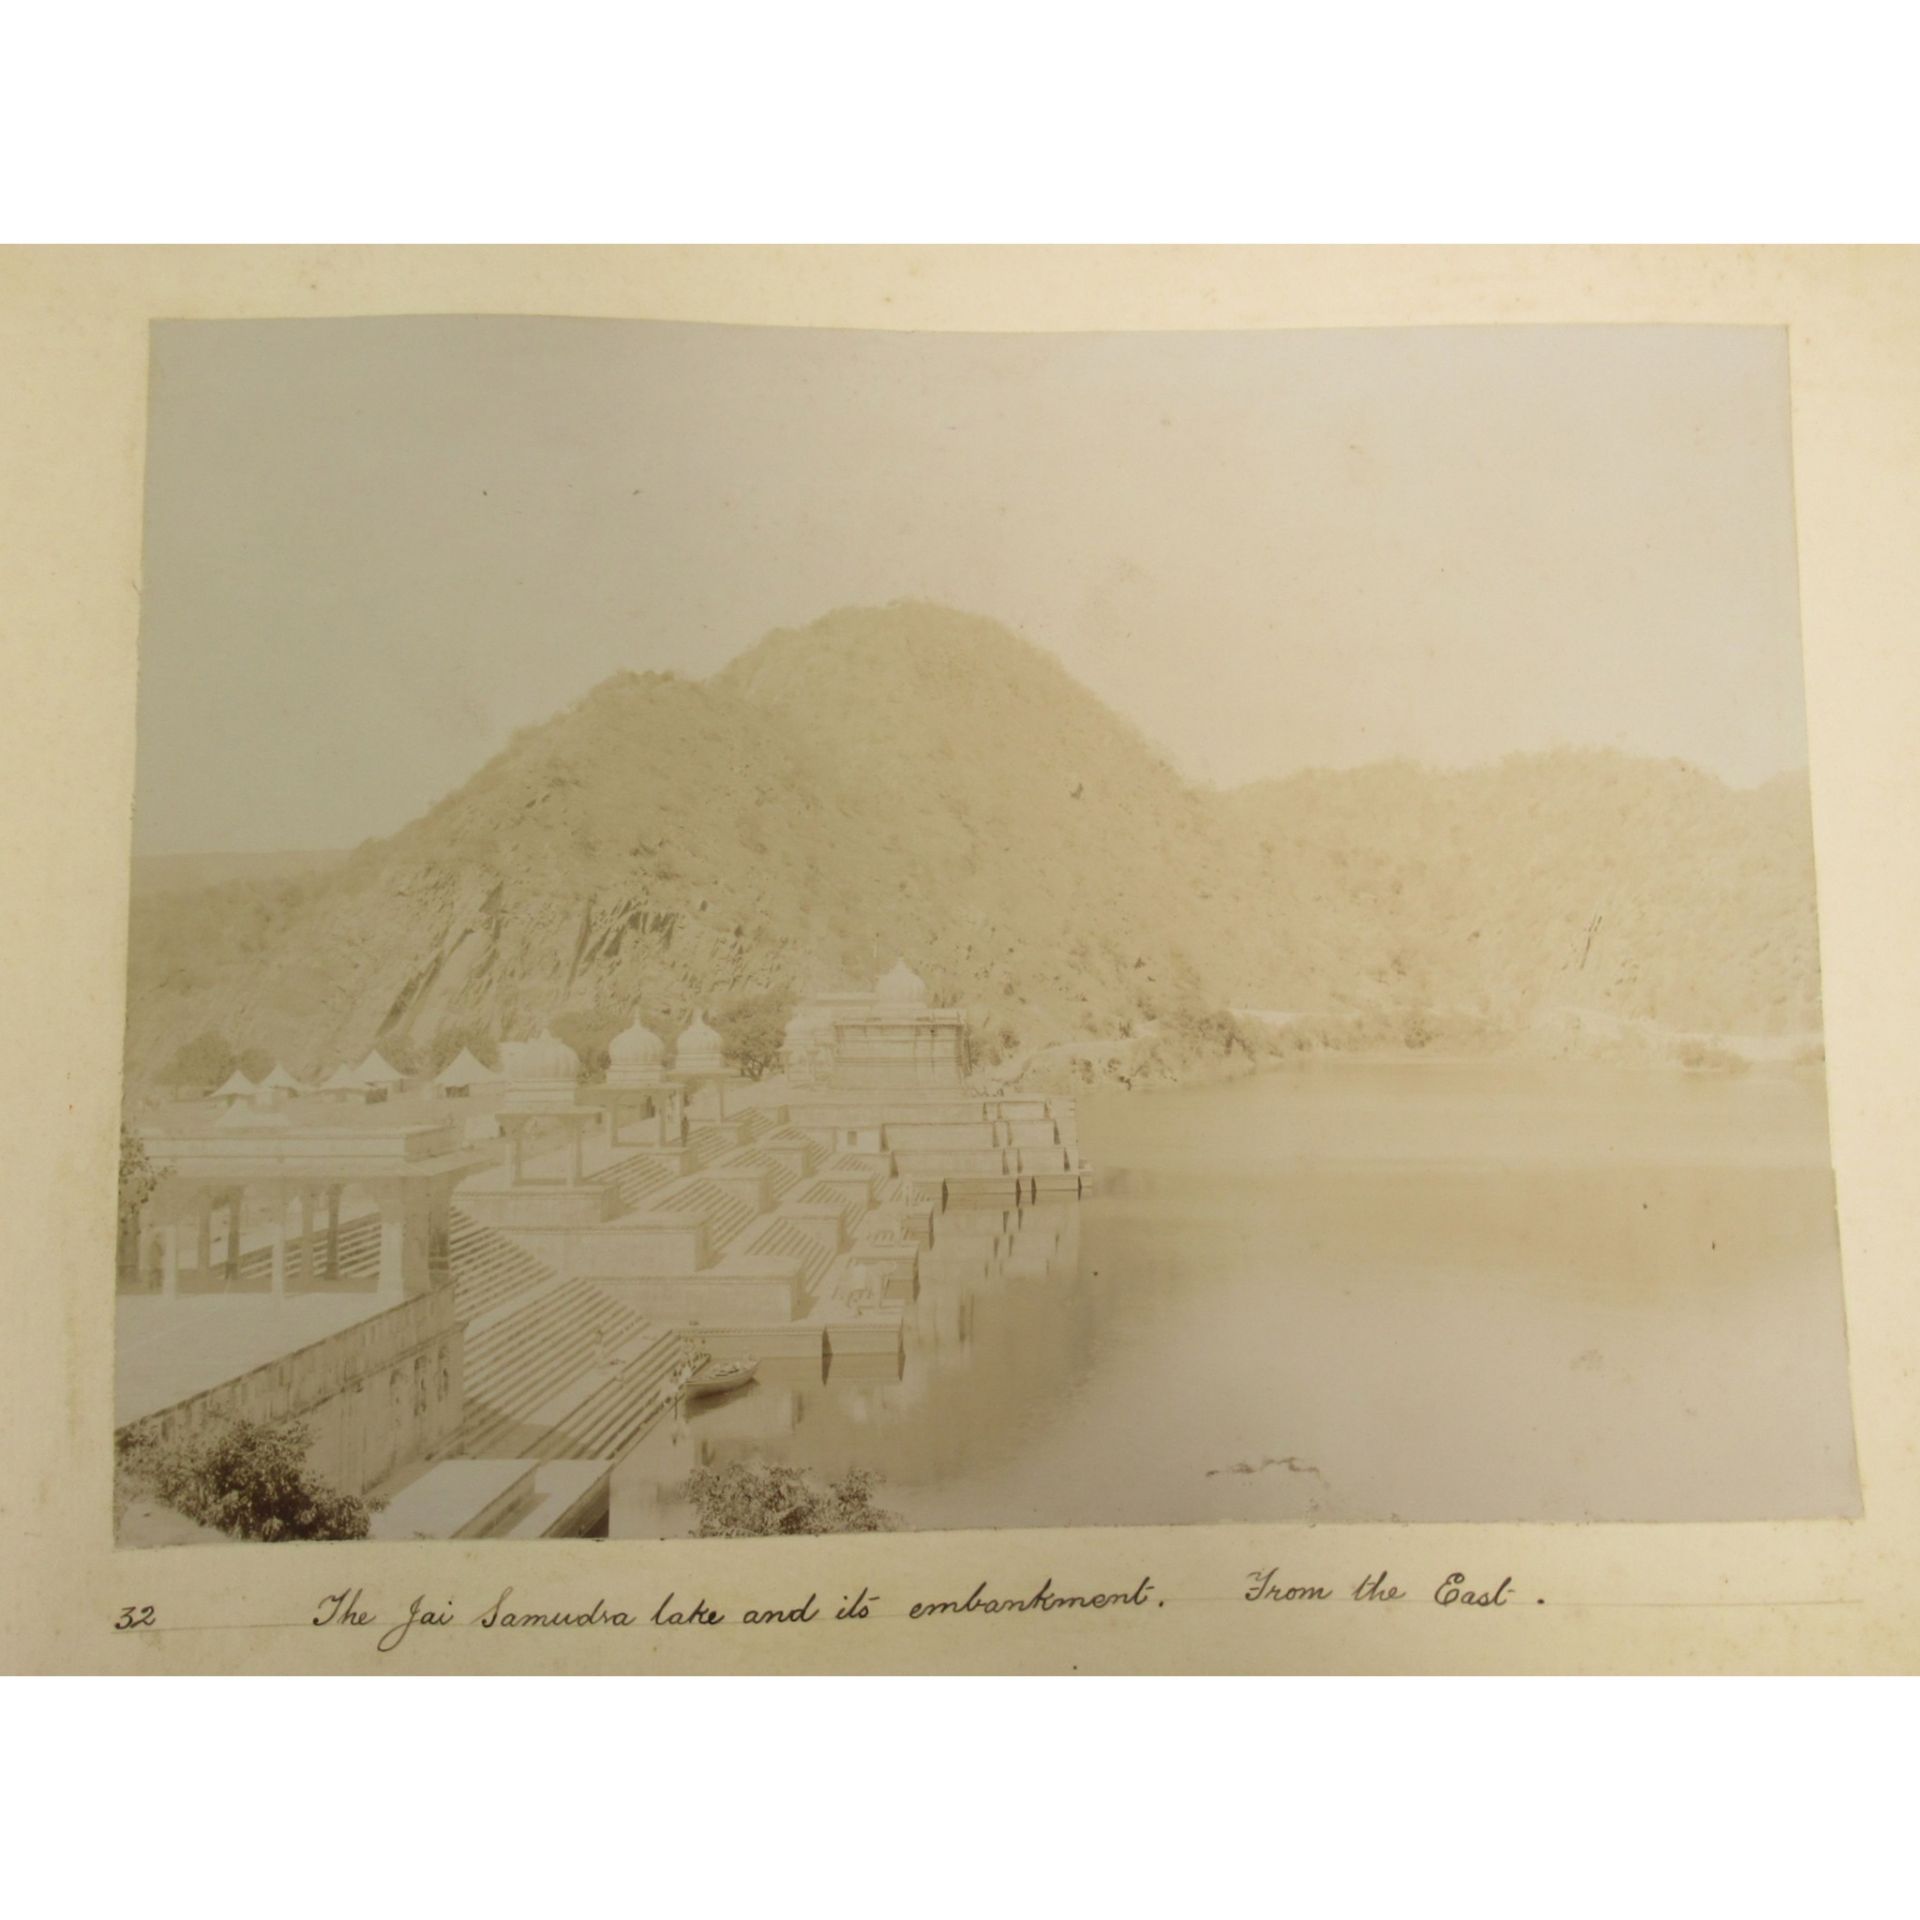 India: a photograph album Photographs of Rajasthan by Mohan Lal of Udaipur, late 19th century - Image 21 of 23